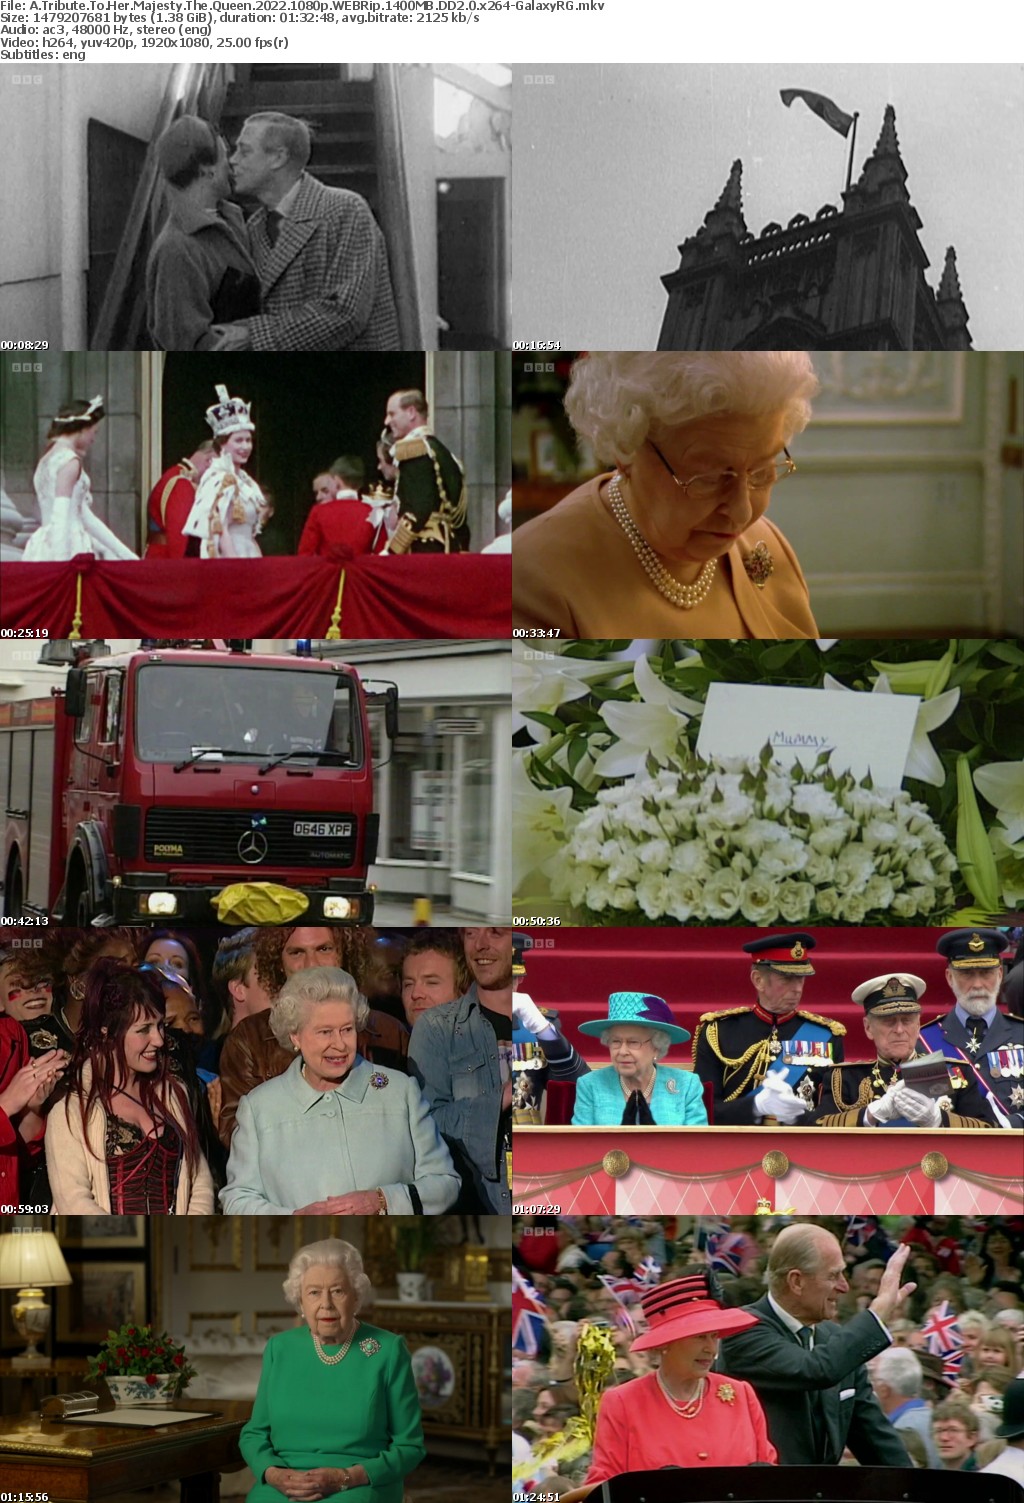 A Tribute To Her Majesty The Queen 2022 1080p WEBRip 1400MB DD2 0 x264-GalaxyRG